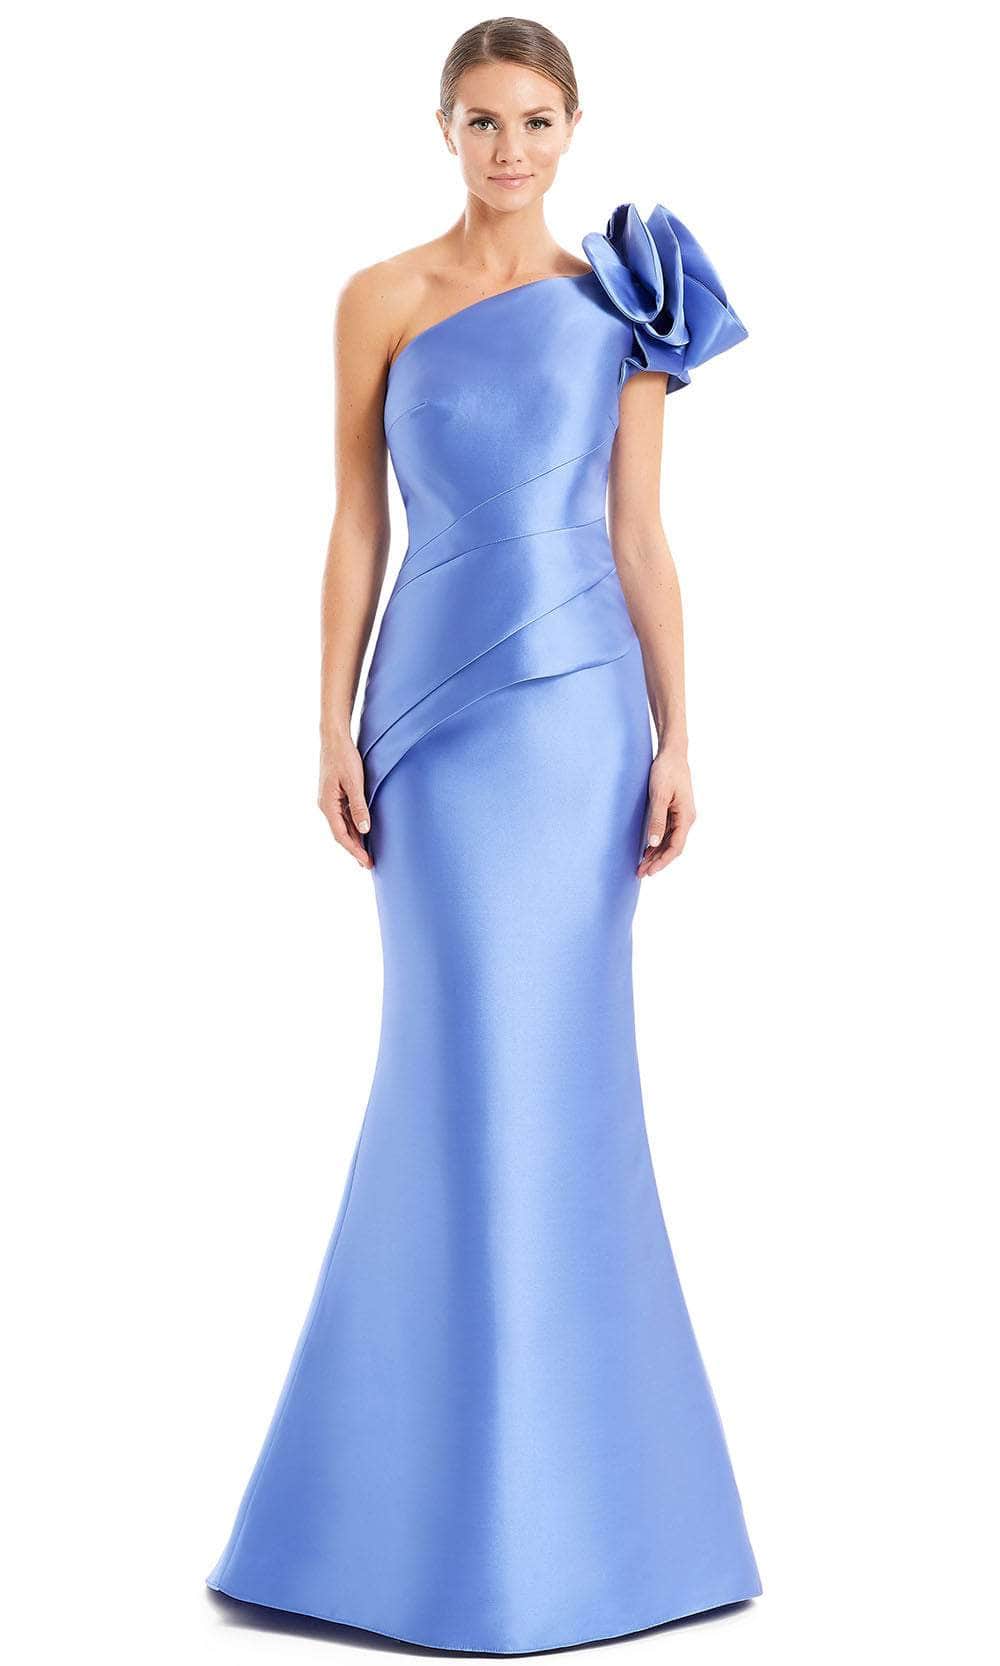 Alexander By Daymor 1673F22 - Asymmetric Pleated Peplum Evening Gown Special Occasion Dress 4 / Periwinkle